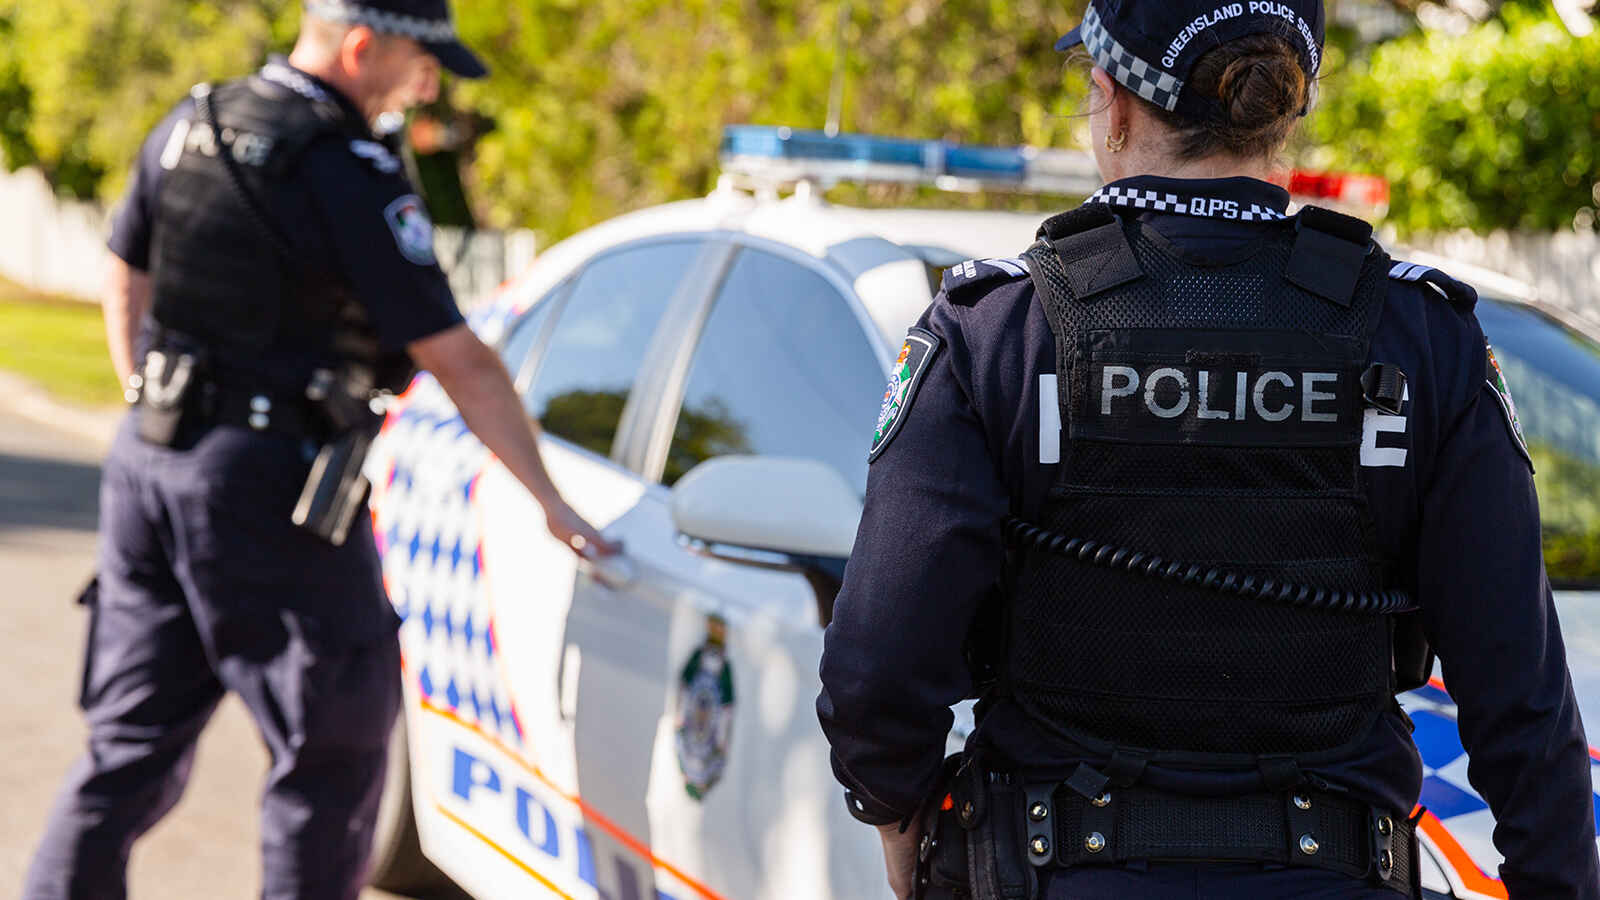 Qld police 4 resize